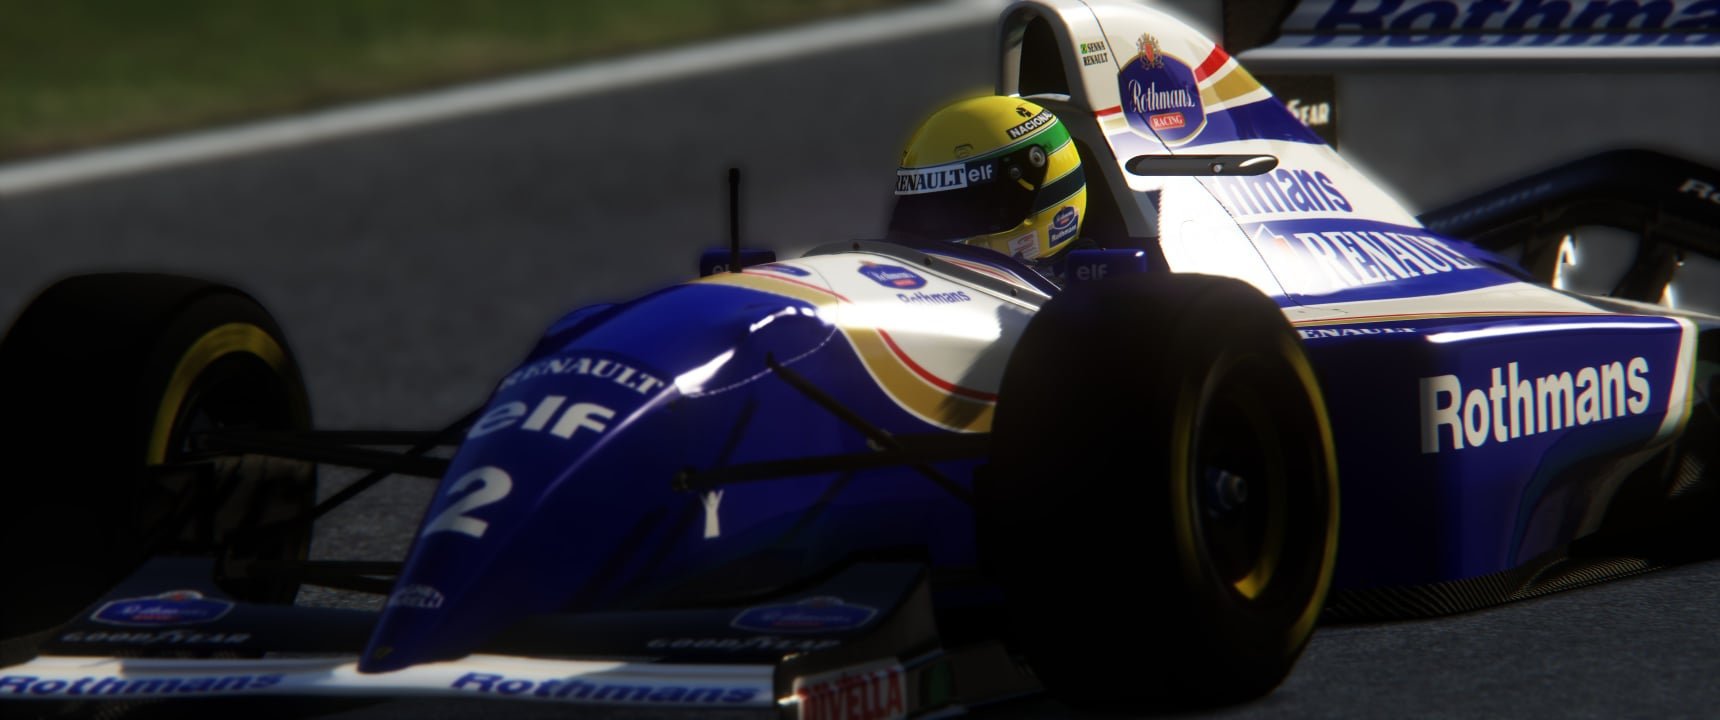 More information about "Assetto Corsa: Williams FW16 1994 (versione beta 0.5) by ASR Formula"